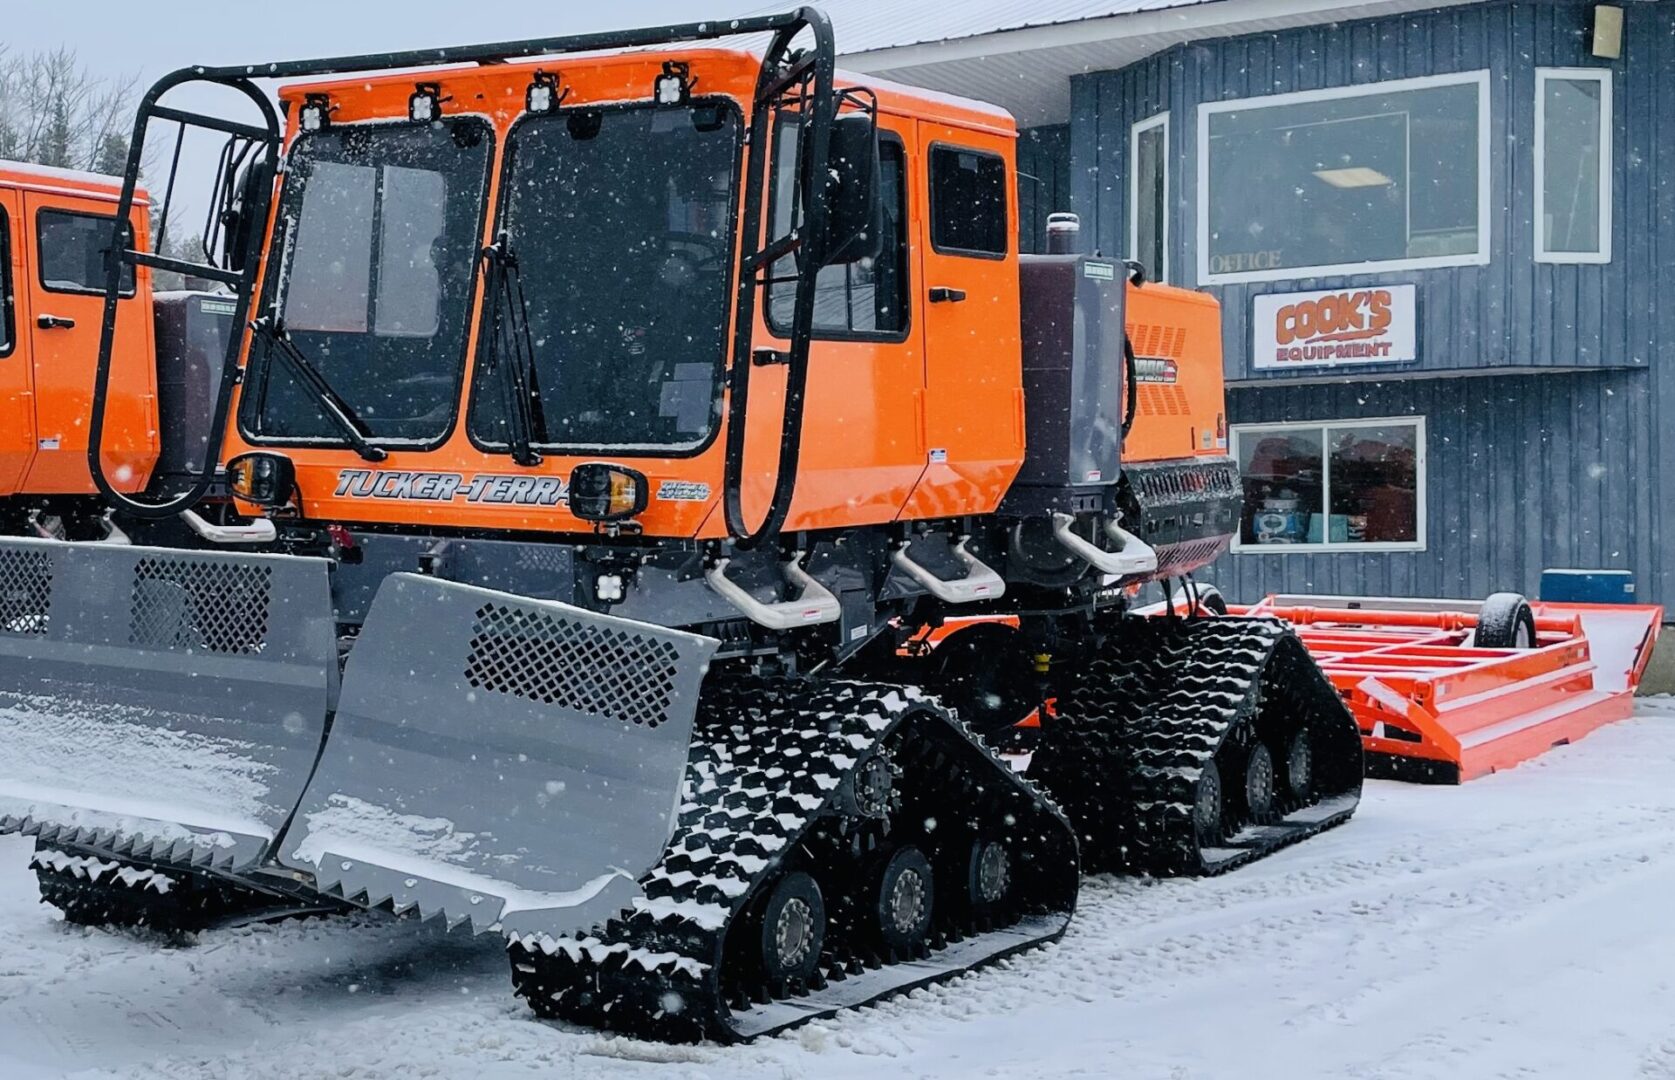 A large orange snow plow truck parked in the street.